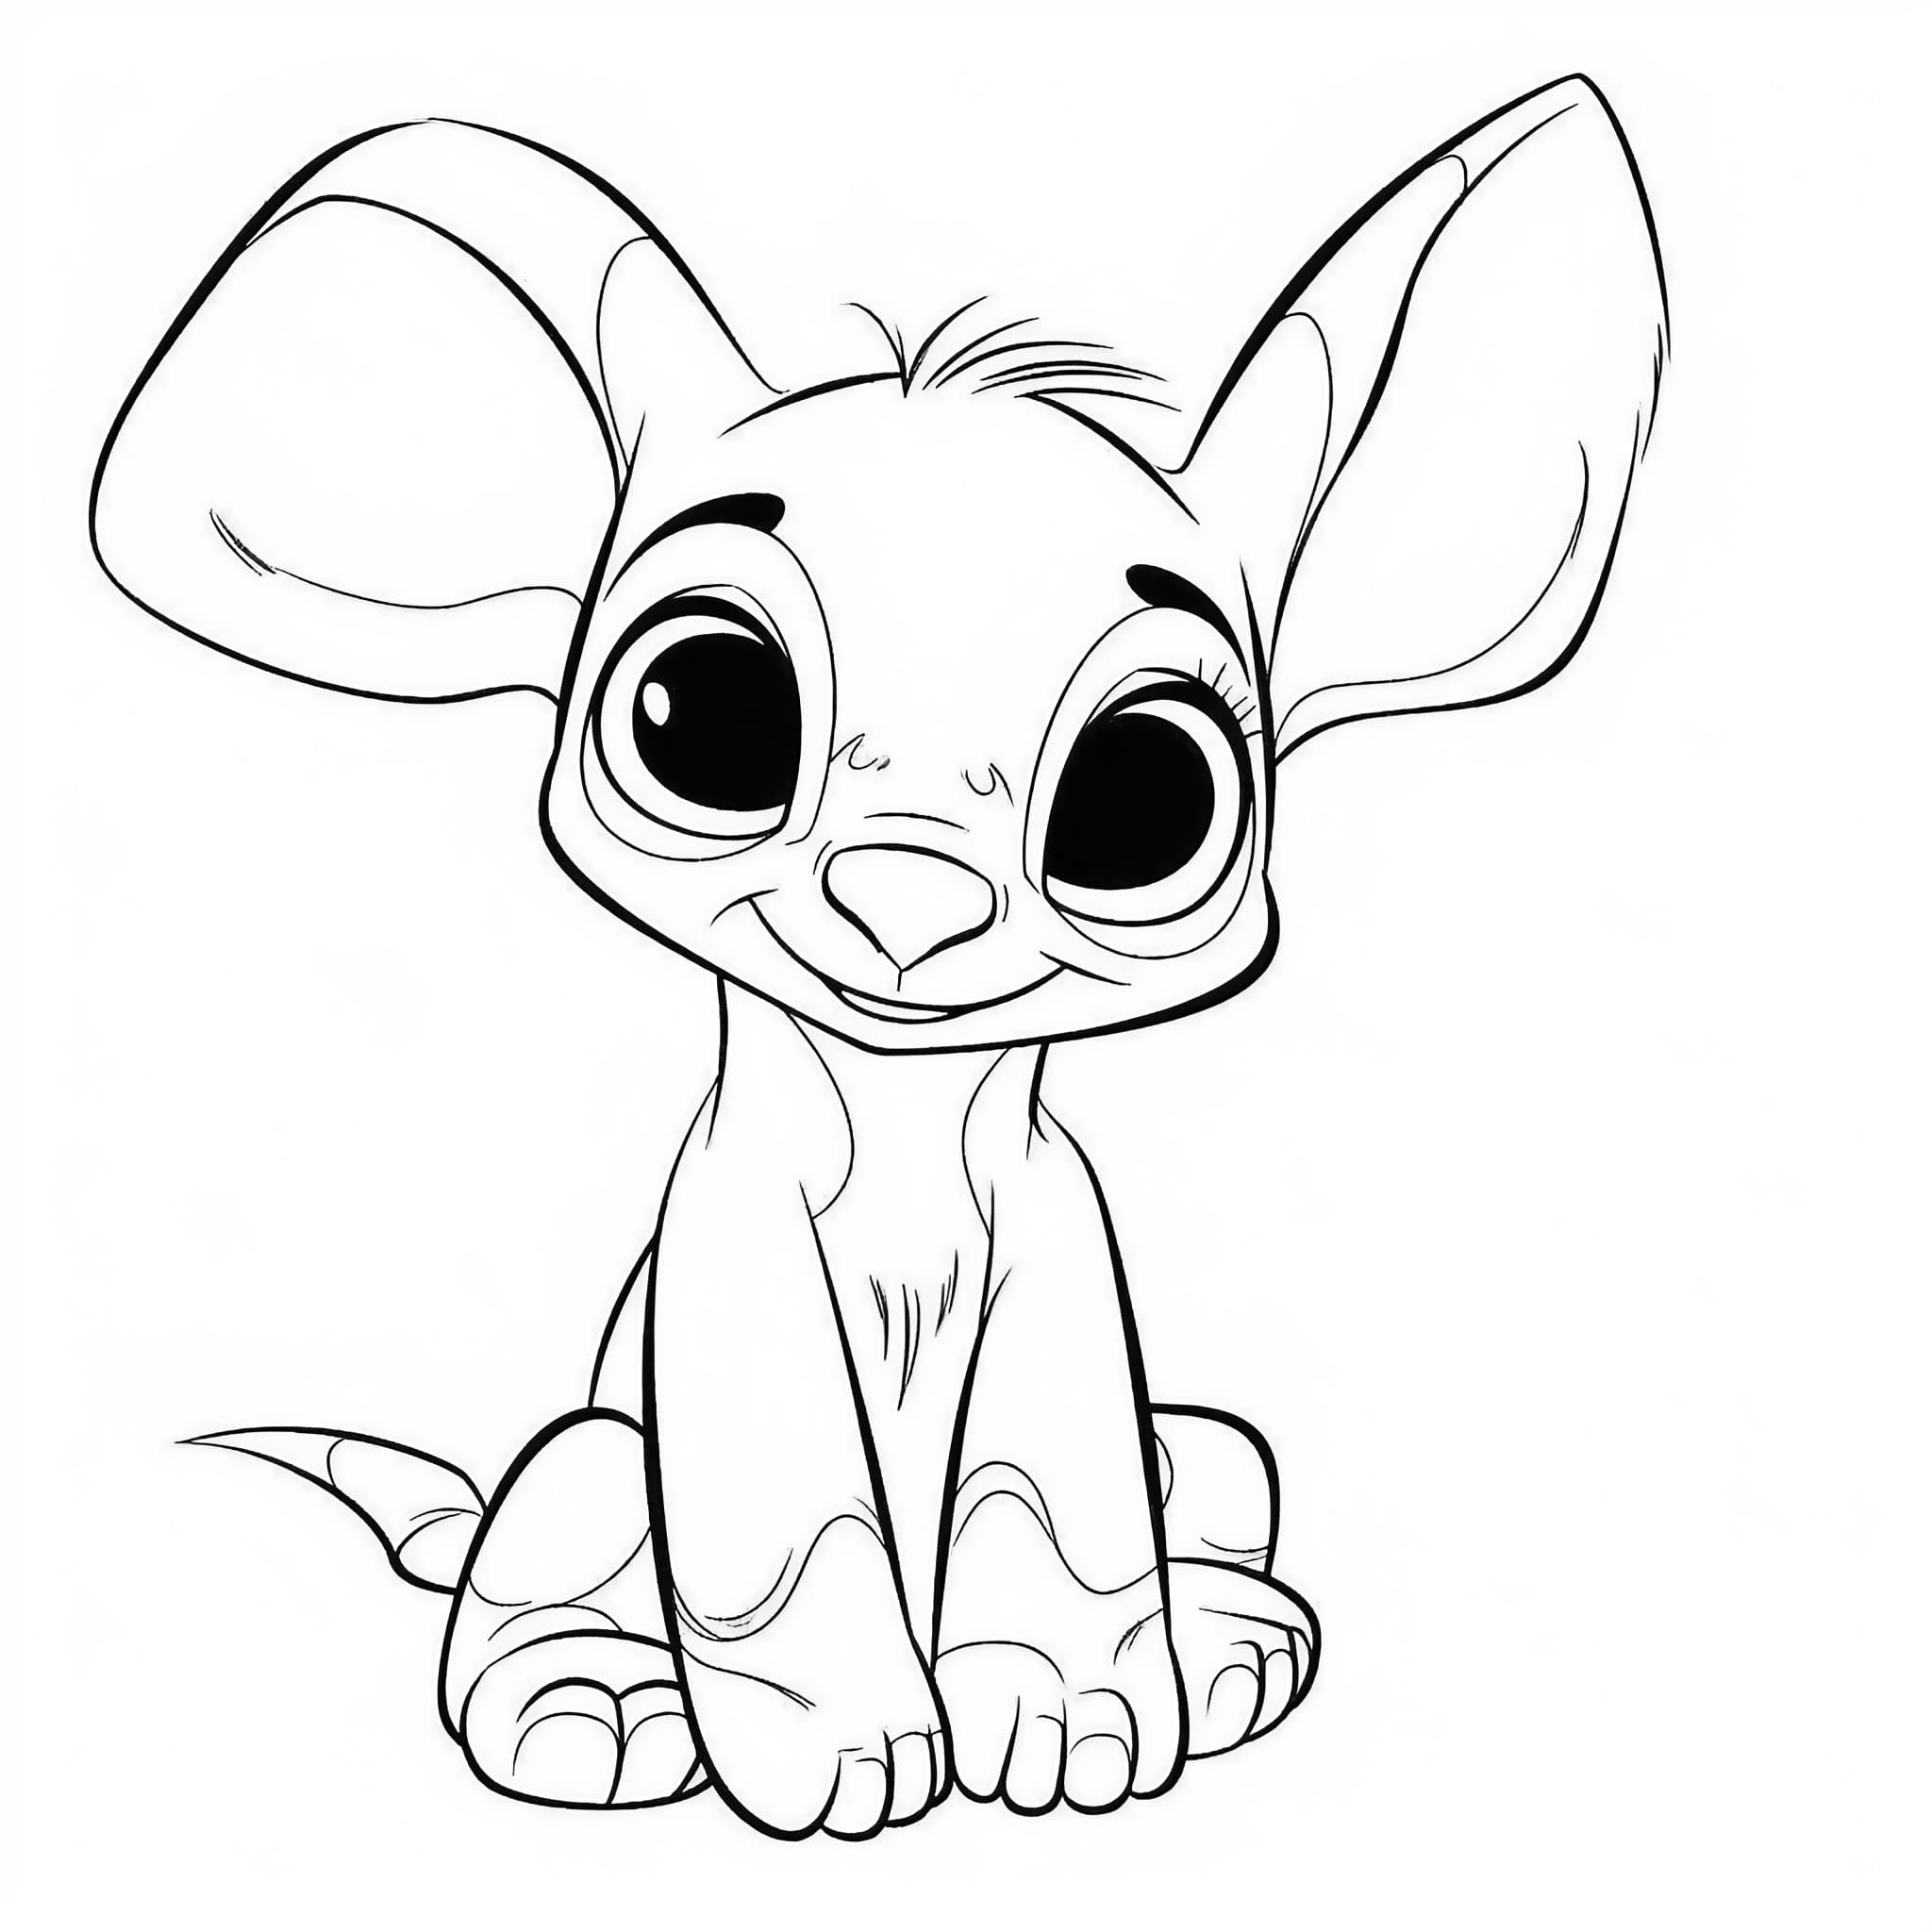 30 Stitch Coloring Pages for Free and ...